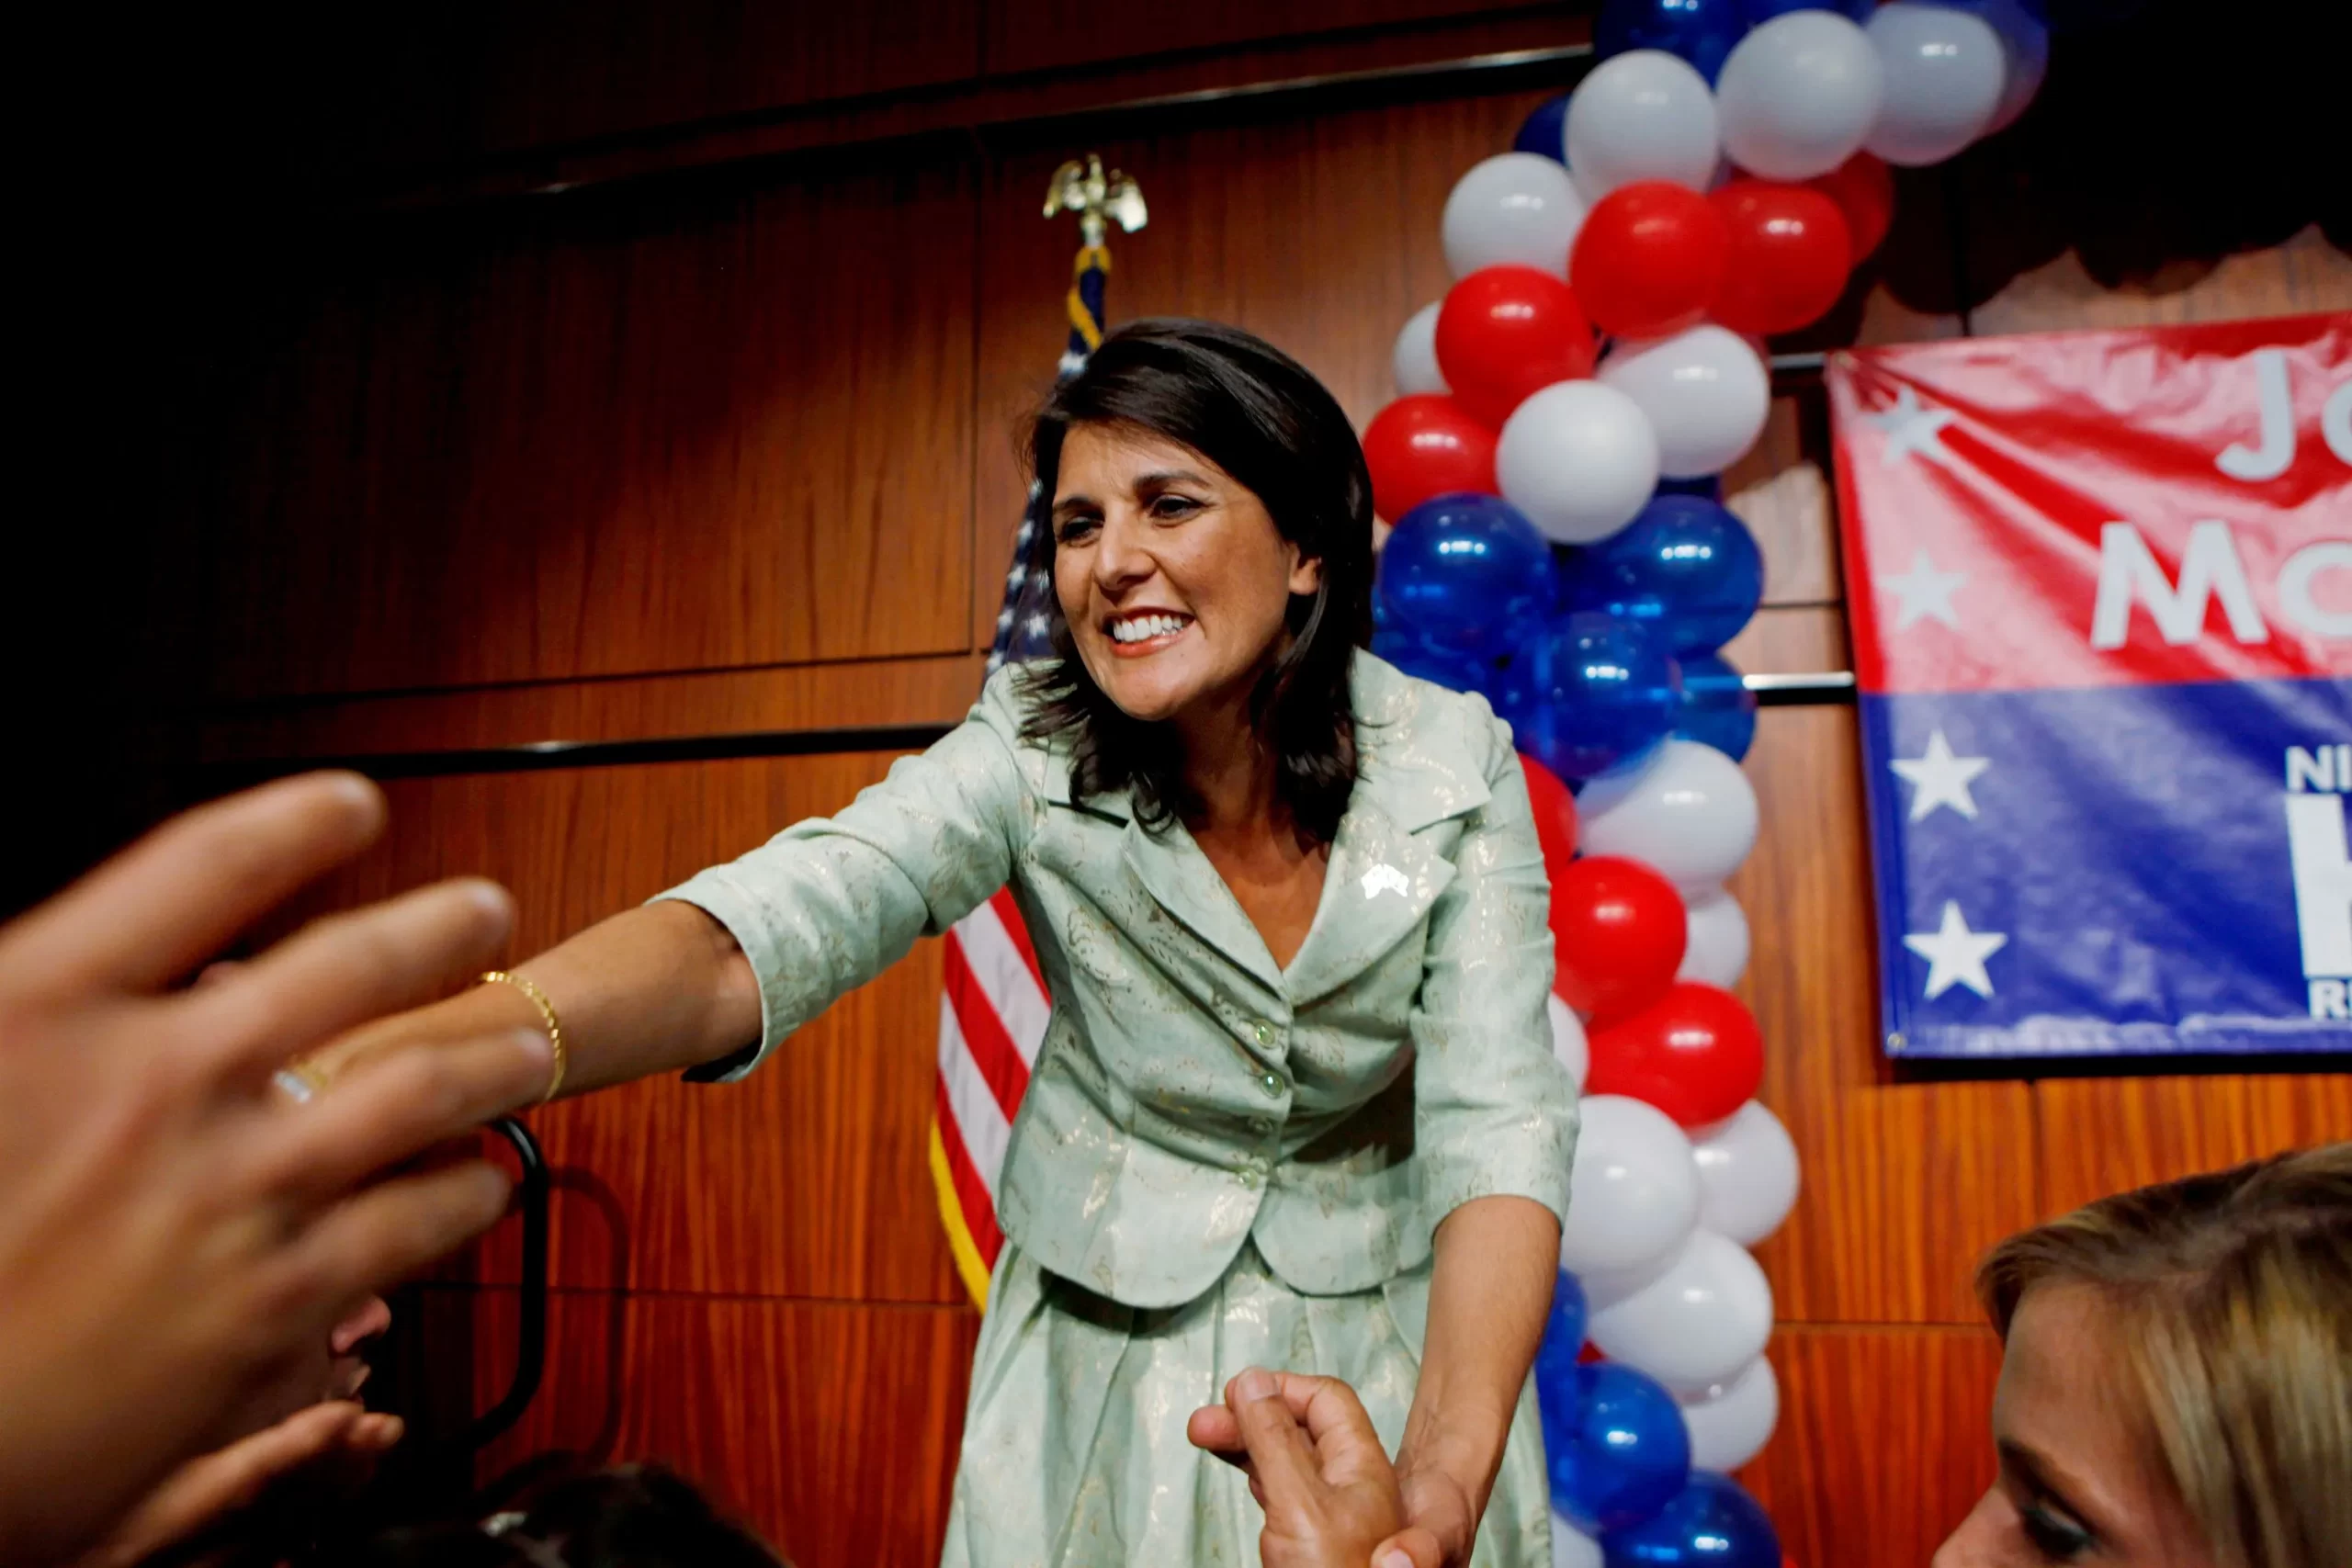 Haley Stands Firm Amid Escalating Attacks From Trump, the Last-standing 2024 Gop Rival